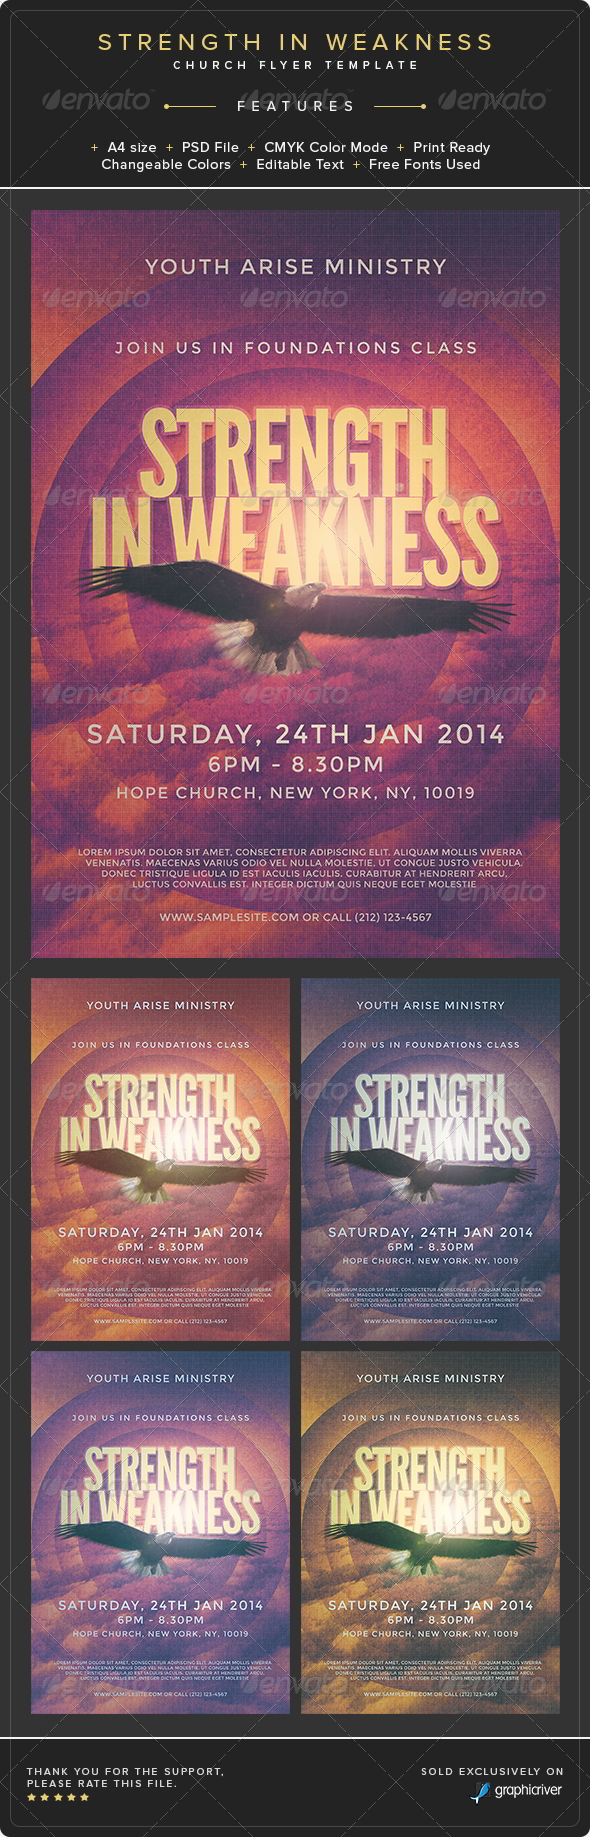 Strength in Weakness Church Flyer Template